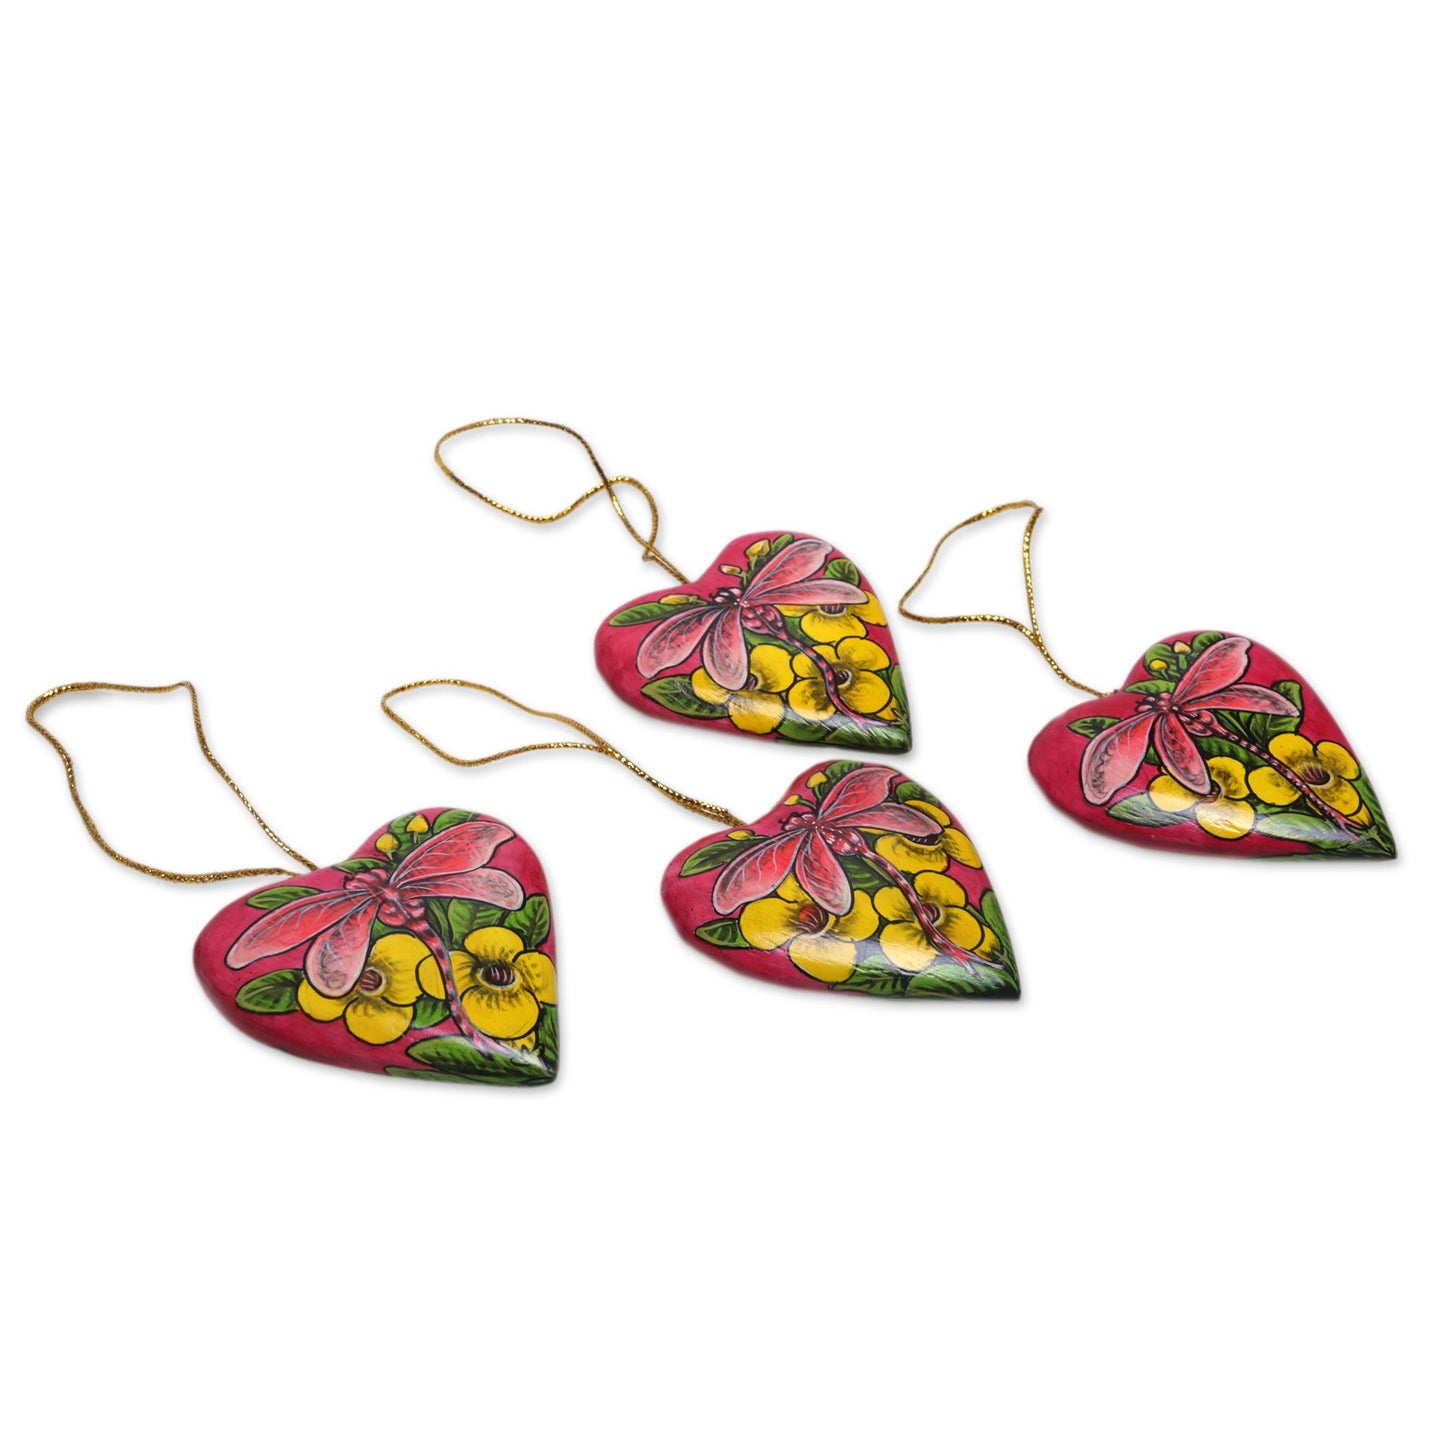 Dragonfly Love 4 Hand Painted Balinese Heart Ornaments with Dragonflies